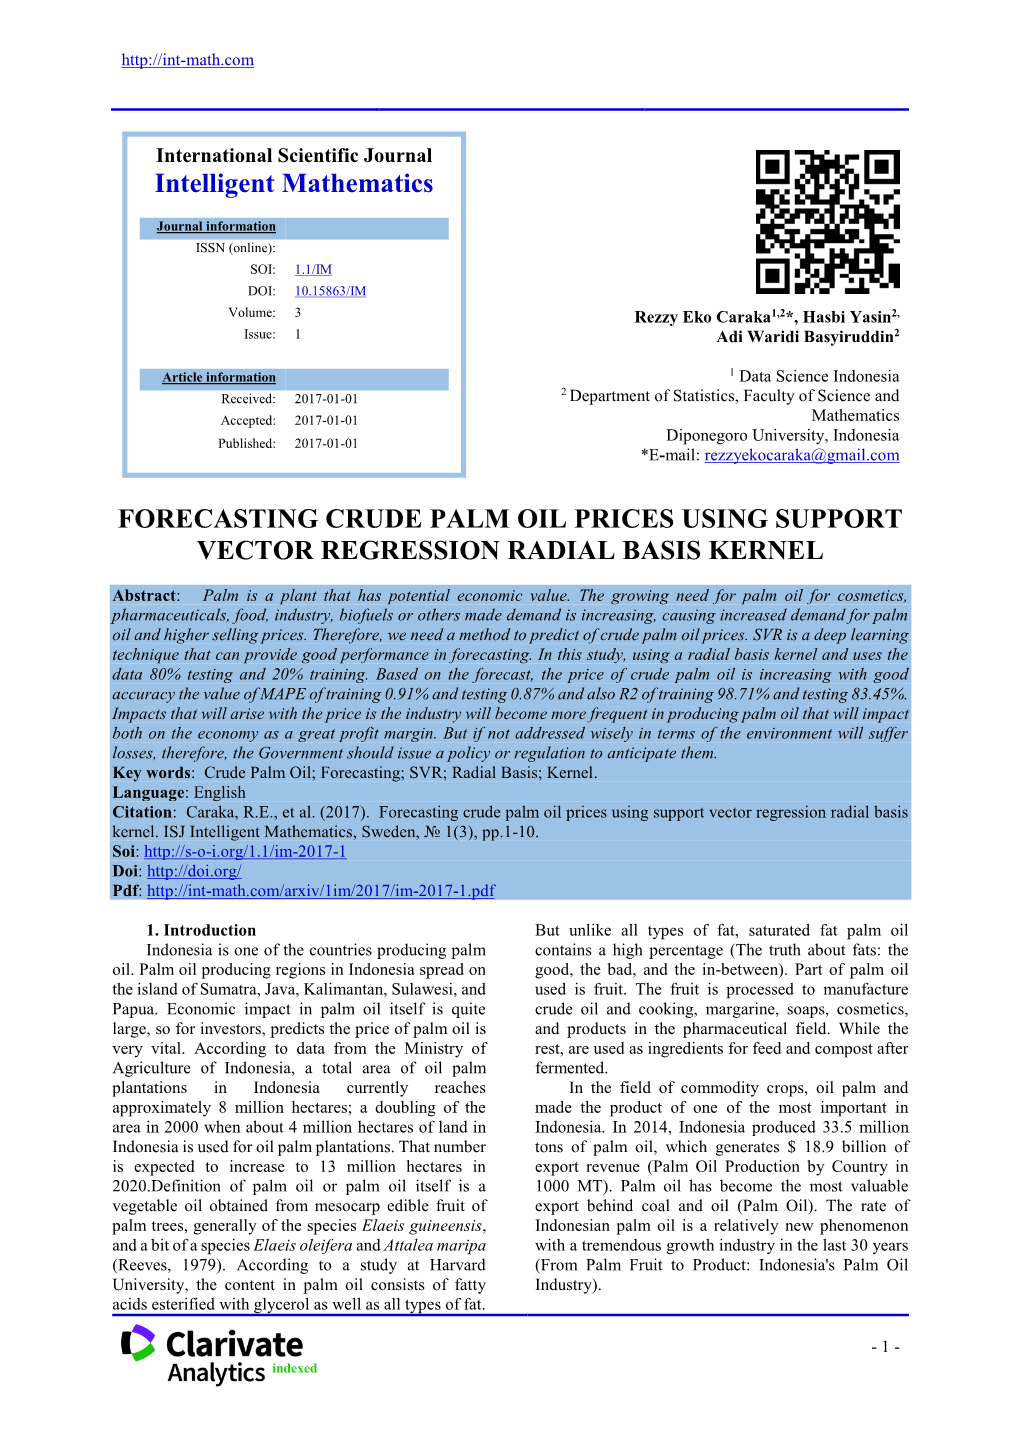 Forecasting Crude Palm Oil Prices Using Support Vector Regression Radial Basis Kernel